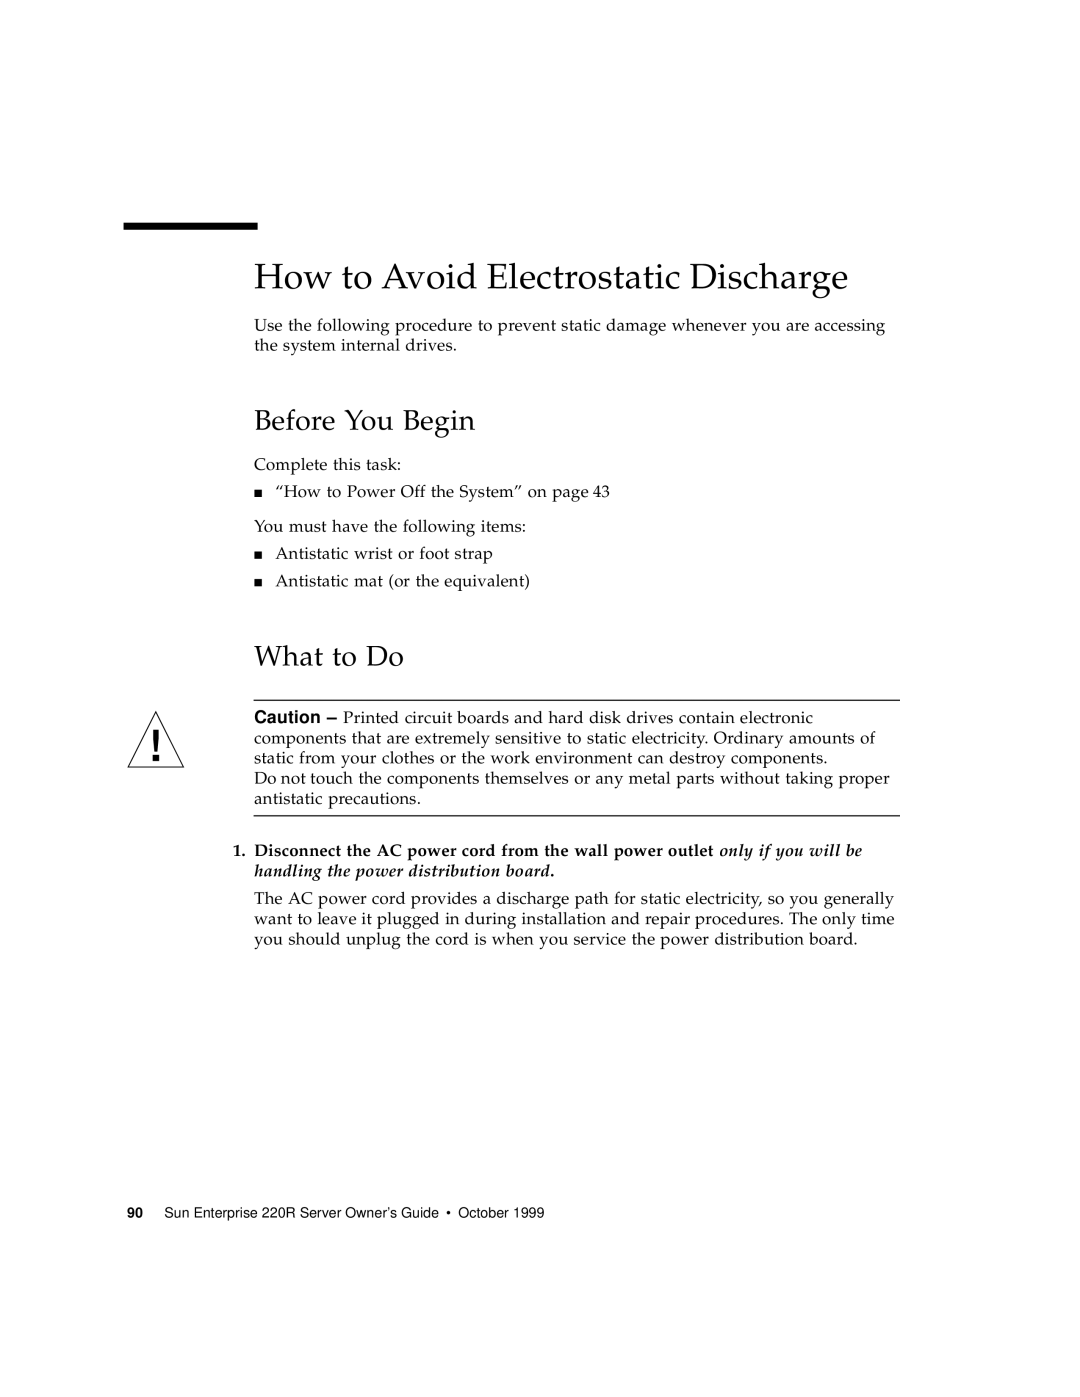 Sun Microsystems 220R manual How to Avoid Electrostatic Discharge, Before You Begin, What to Do 